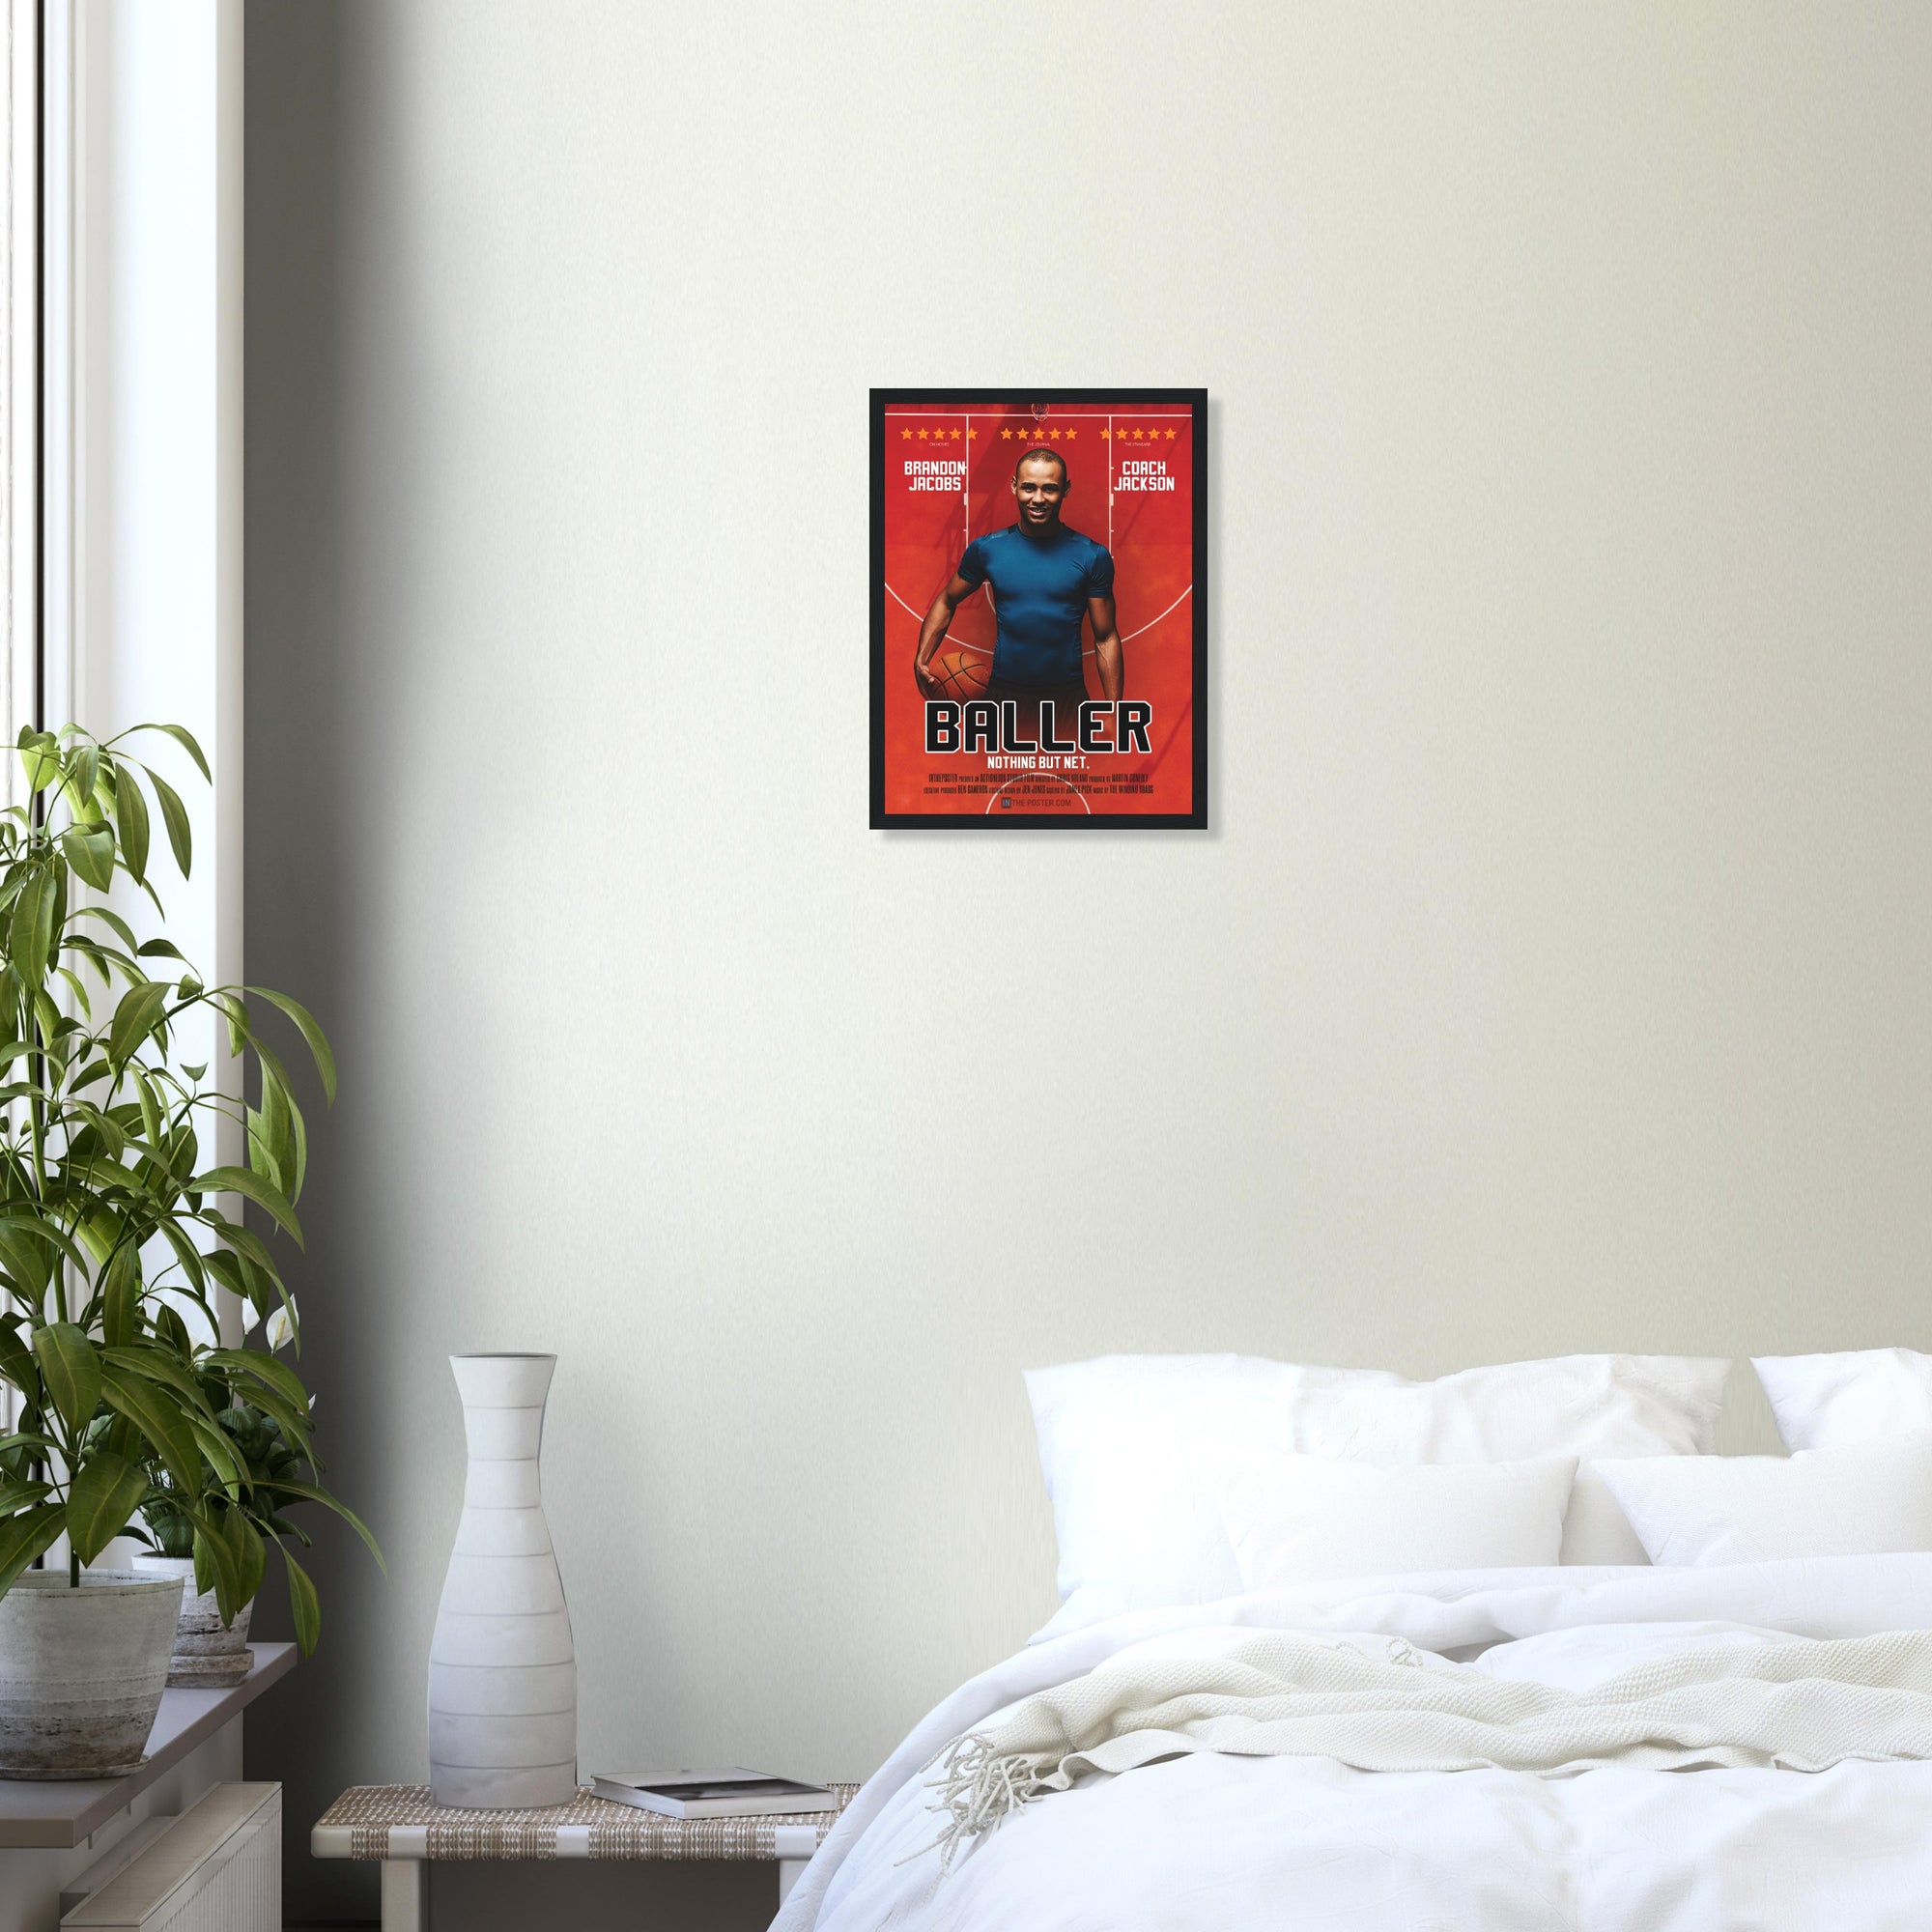 A custom basketball movie poster in a small white frame on a grey wall above a white bed and plant